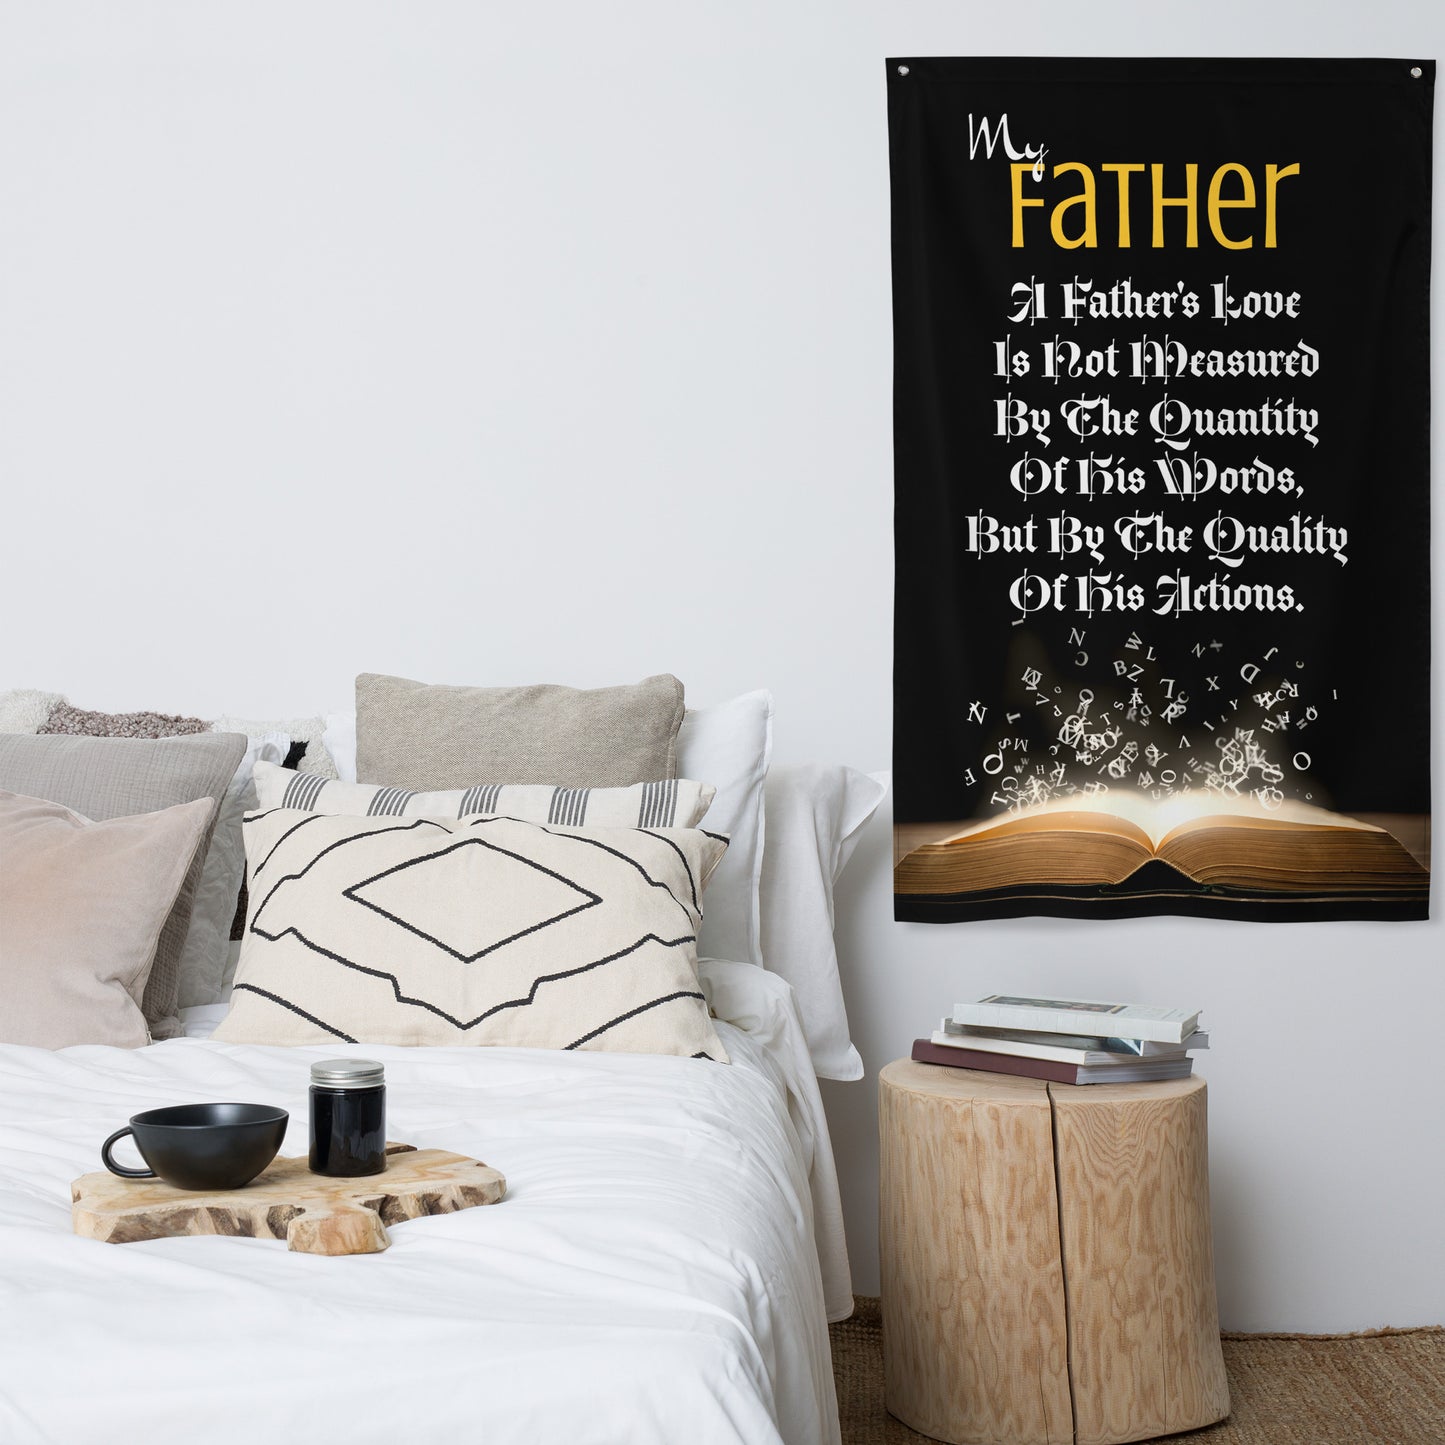 Father's Day, Dad, inspiring quote, great for any Workshop, Garage, Office home.